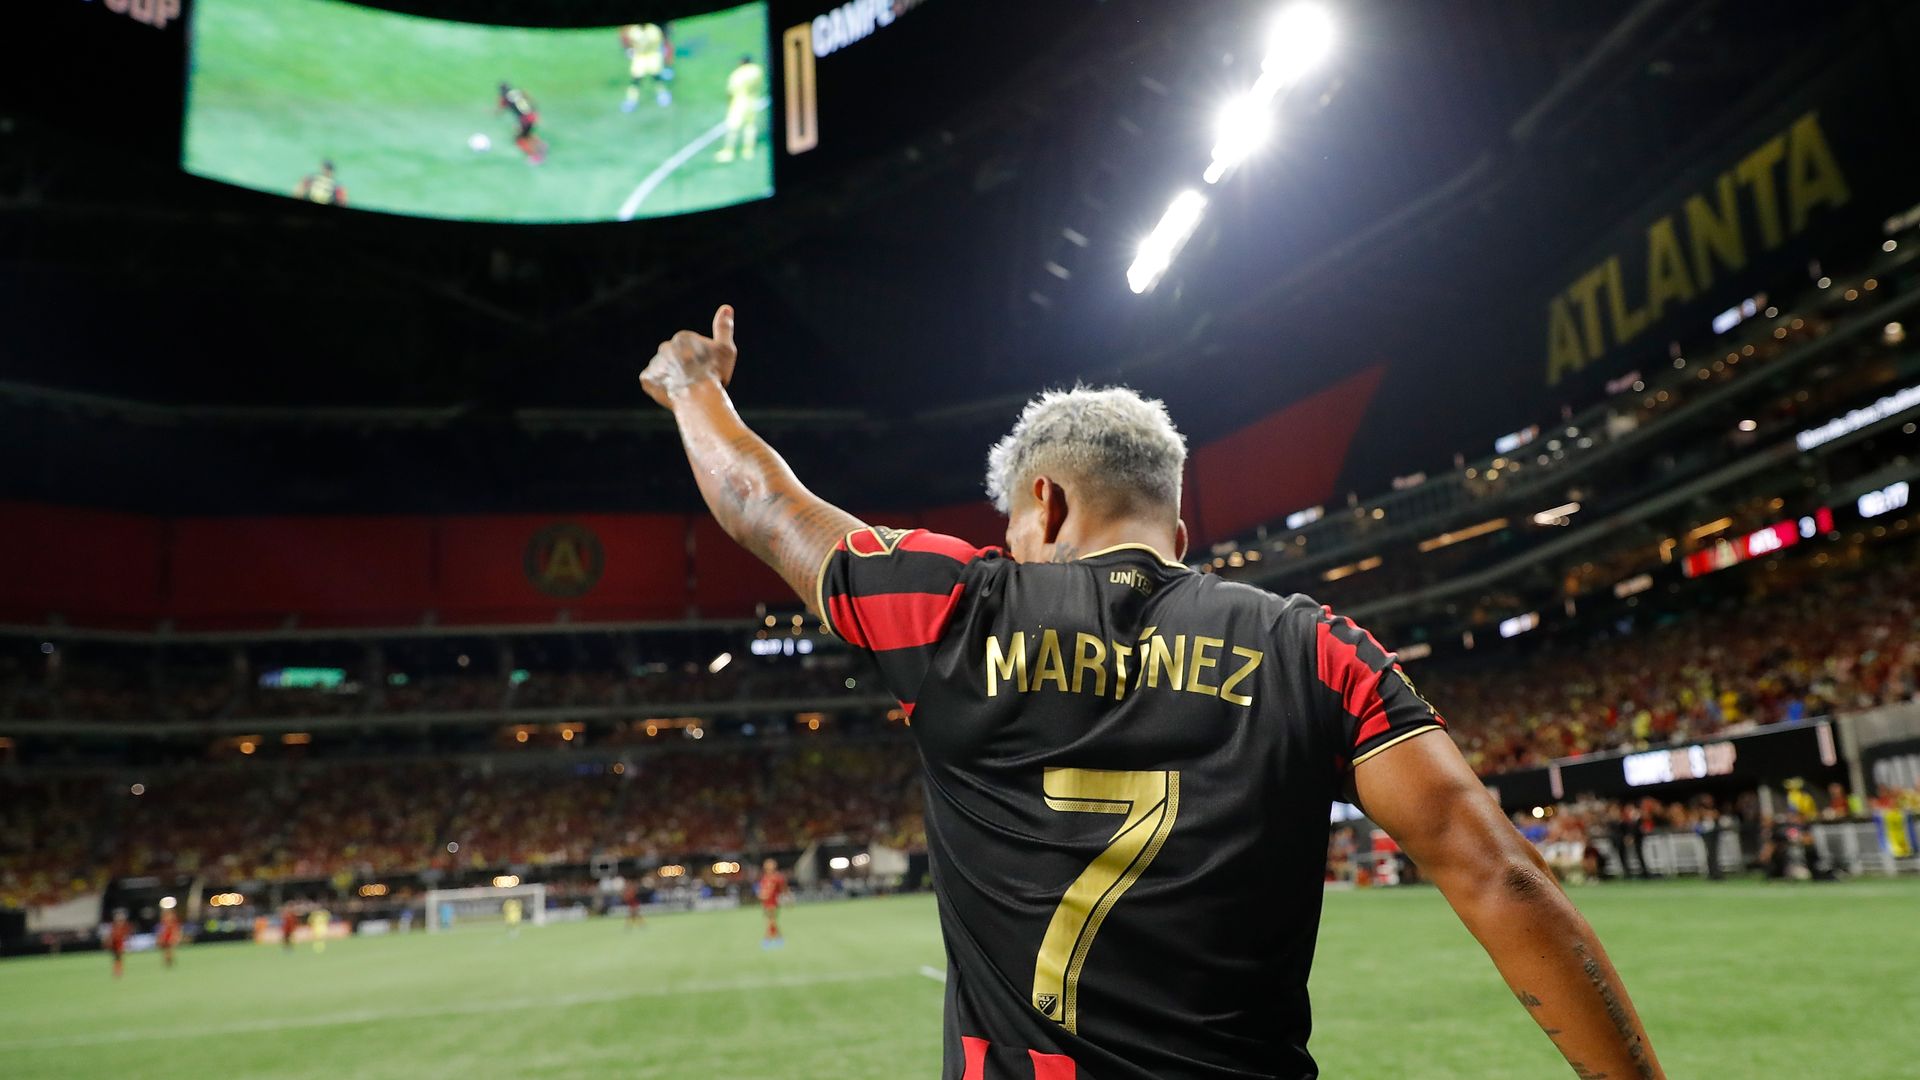 A view of Josef Martinez giving a thumbs up the players on the field at a soccer game